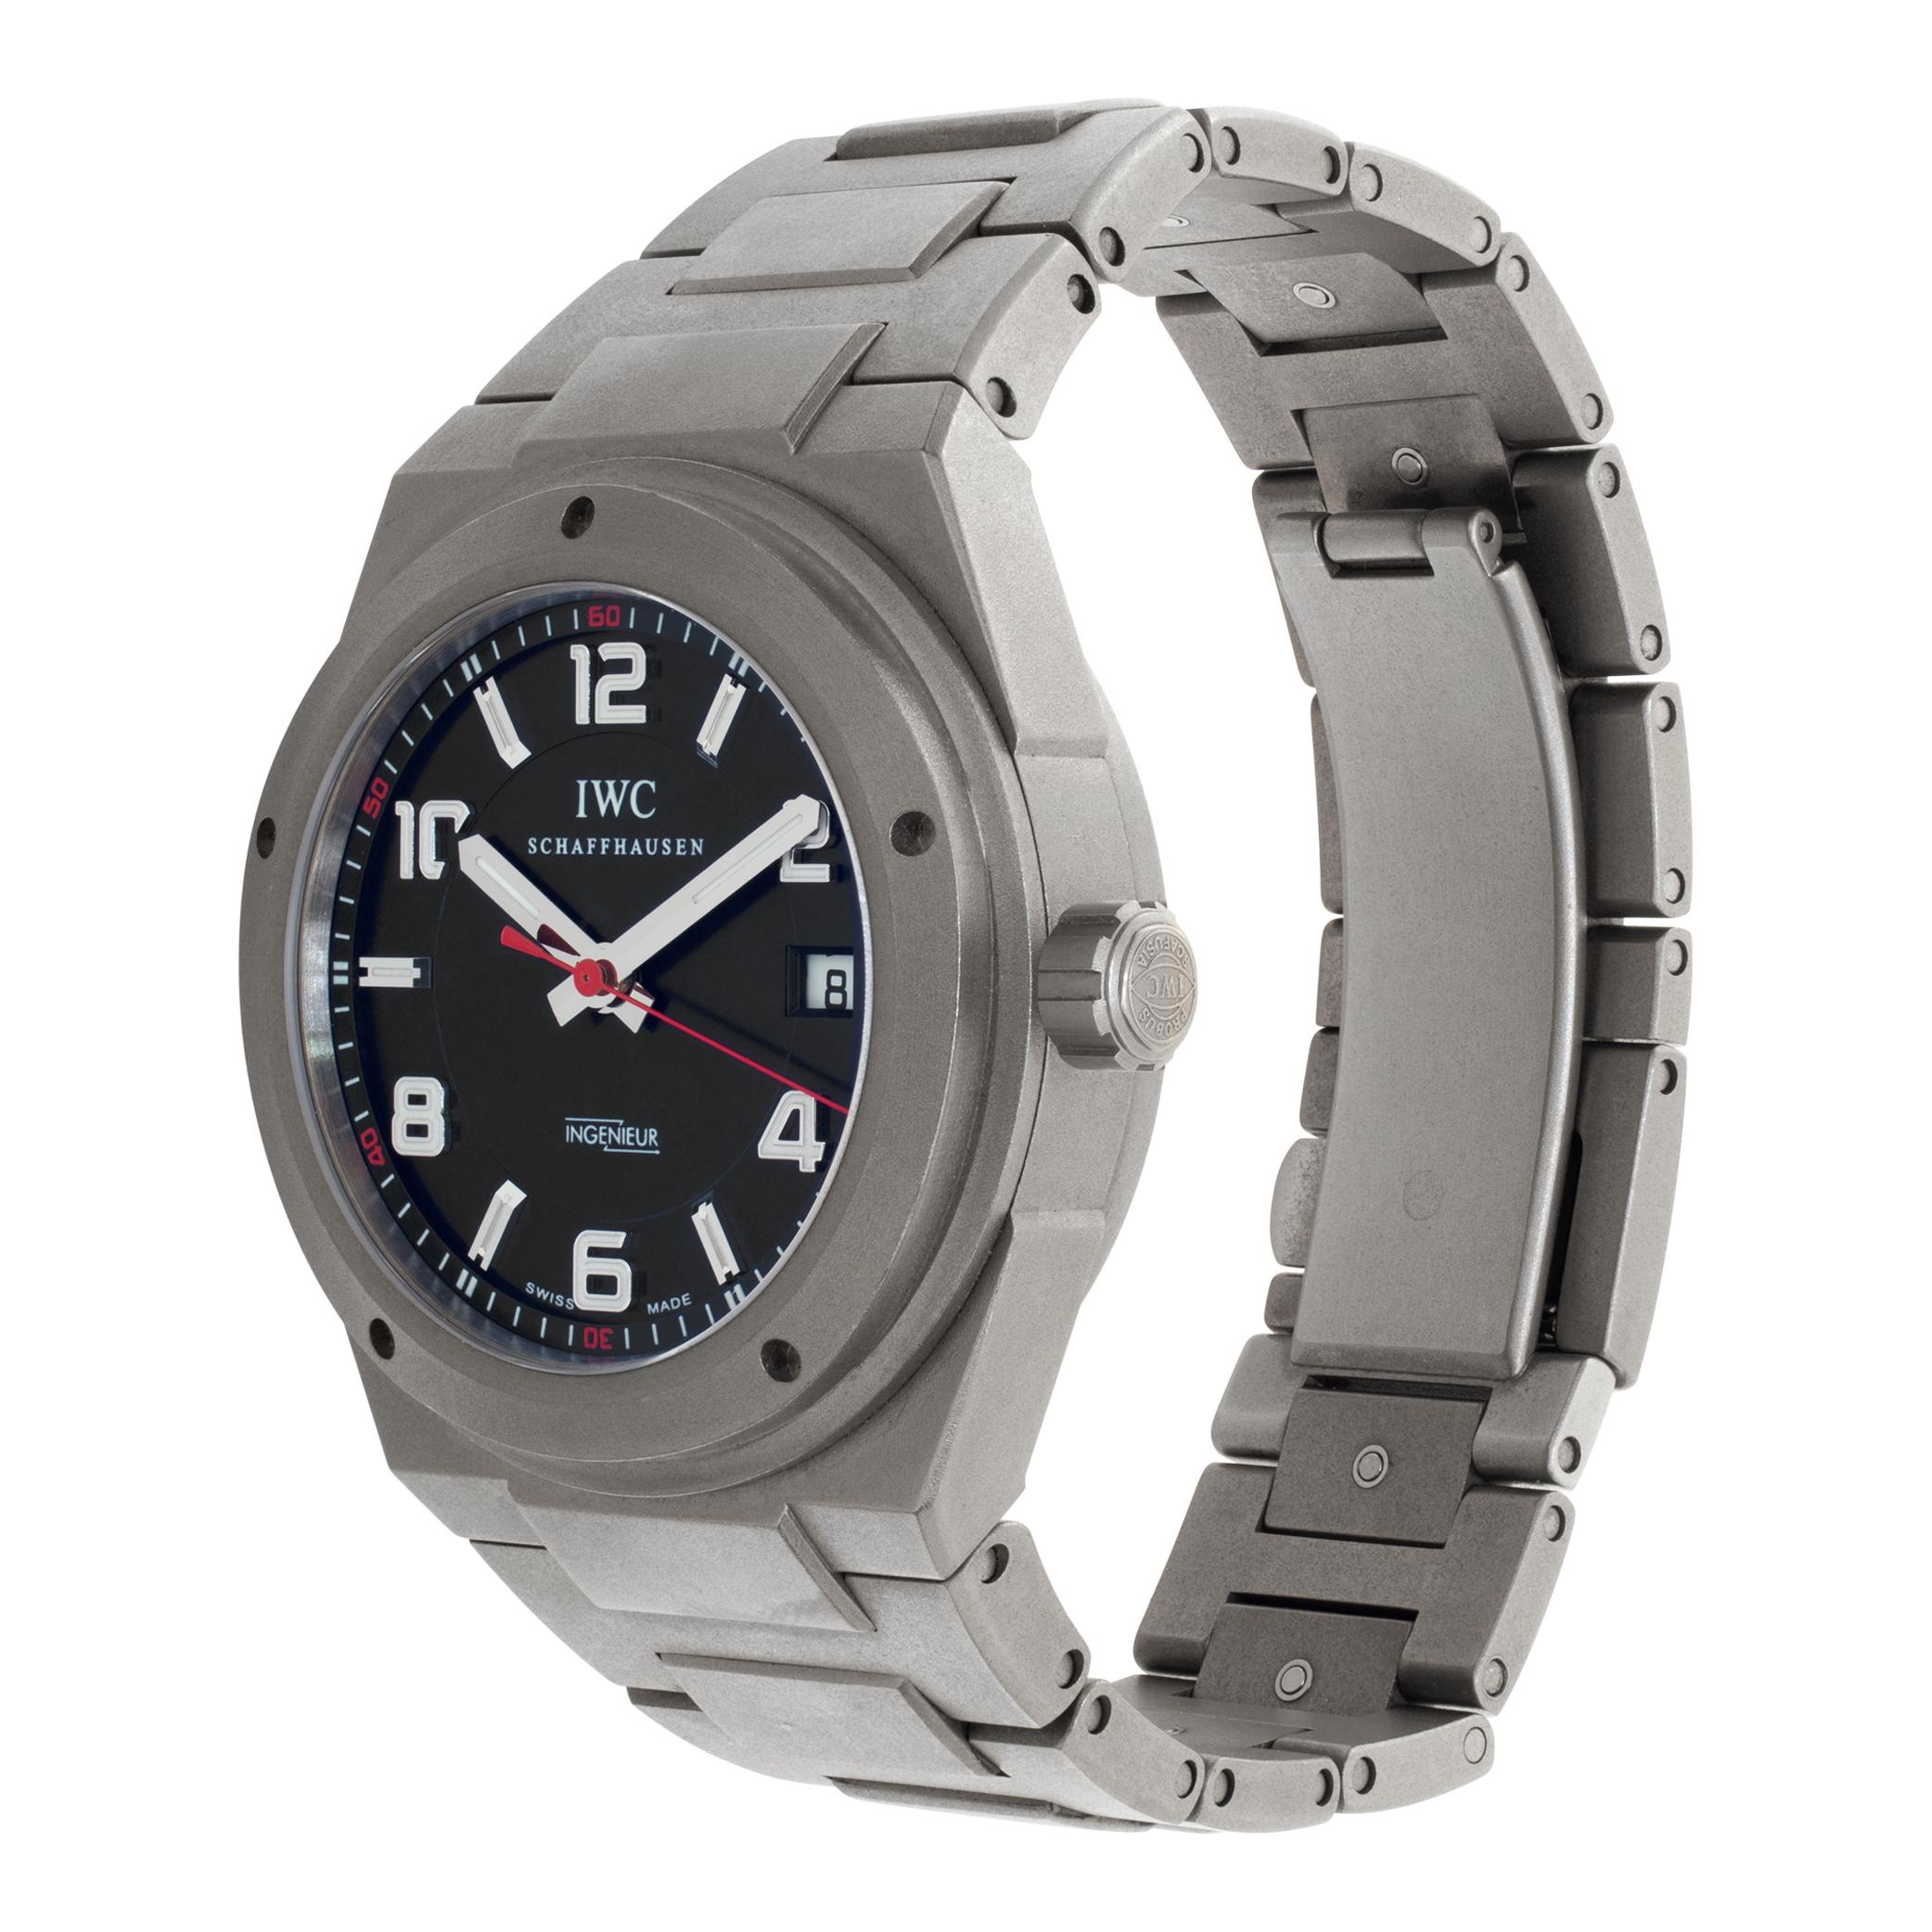 IWC Ingenieur Mercedes AMG edition in Titanium on an original IWC Titanium link bracelet. Auto w/ date and sweep seconds. 42 mm case size. Ref IW322702. Fine Pre-owned IWC Watch.

 Certified preowned Sport IWC Ingenieur IW322702 watch is made out of